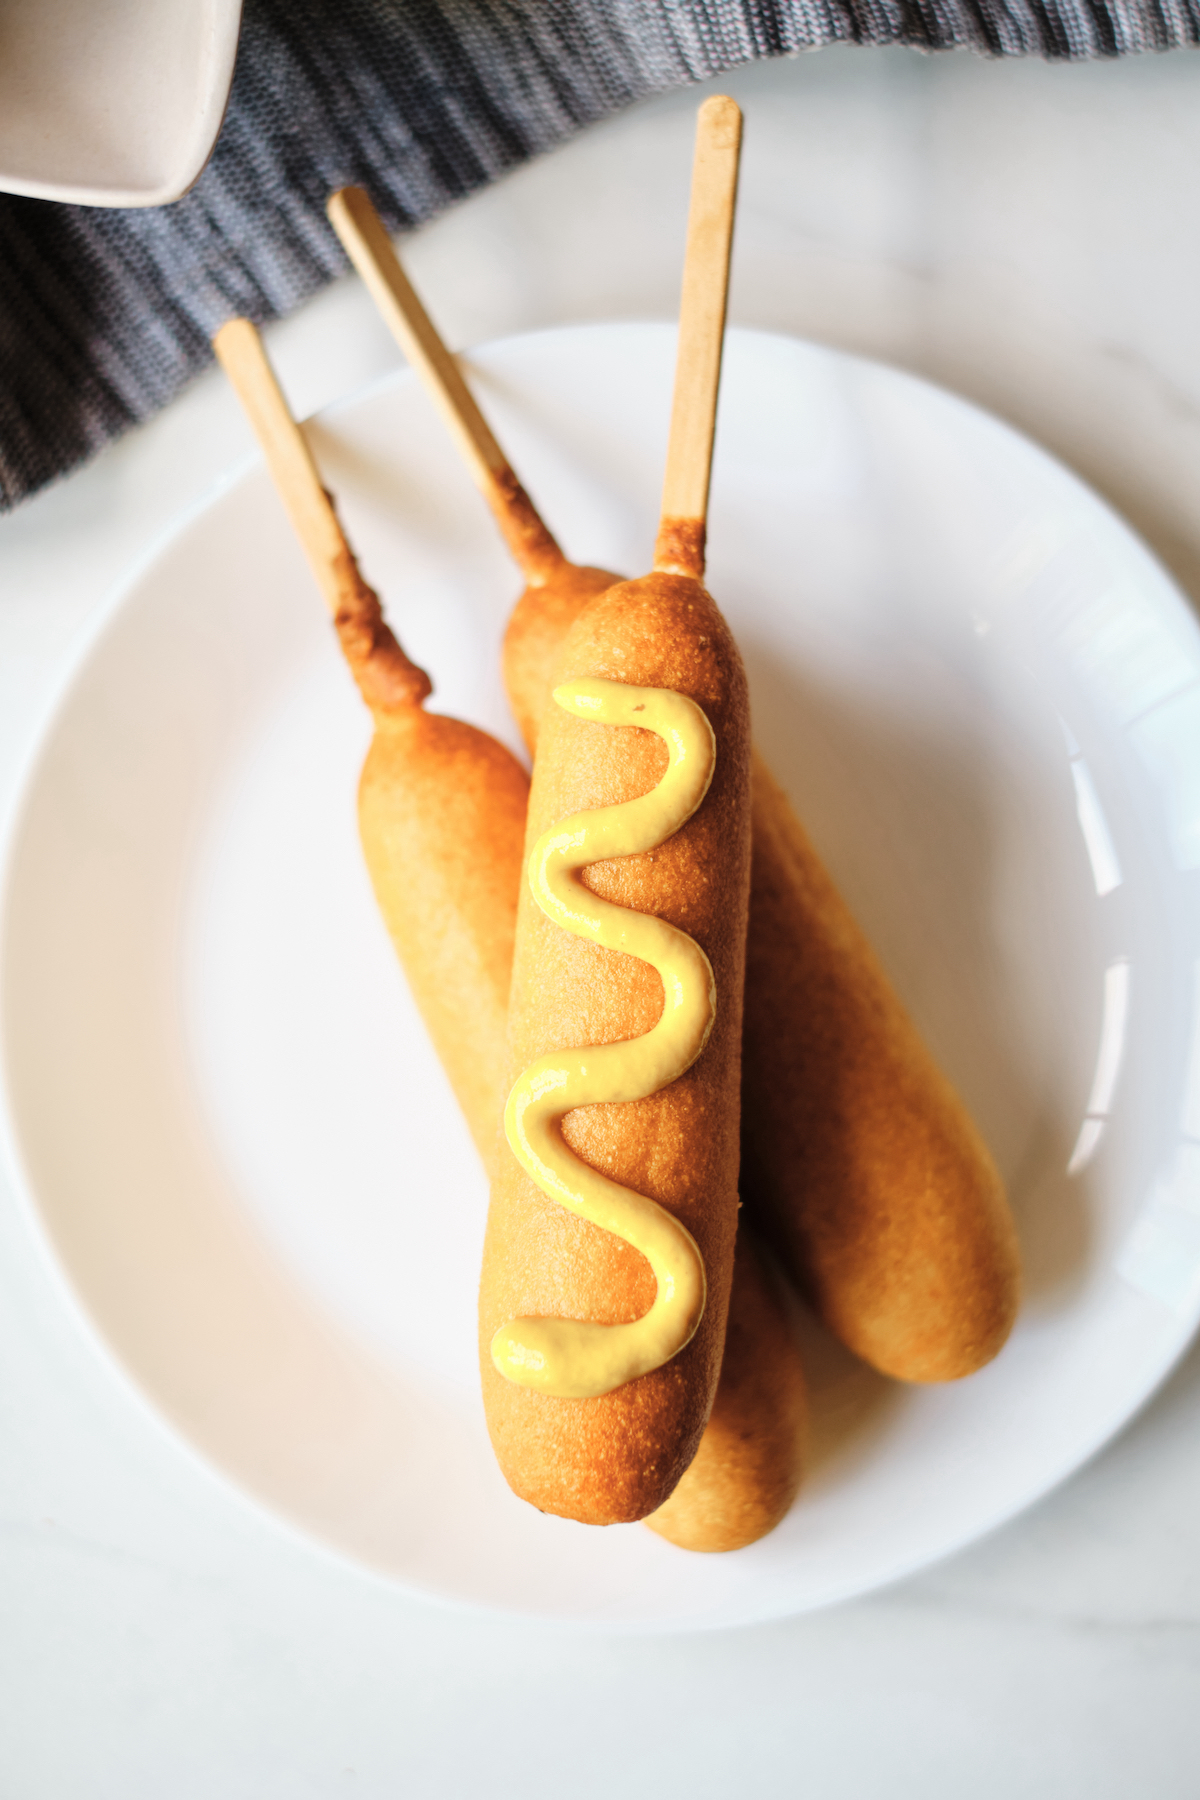 Cooked Corn Dogs